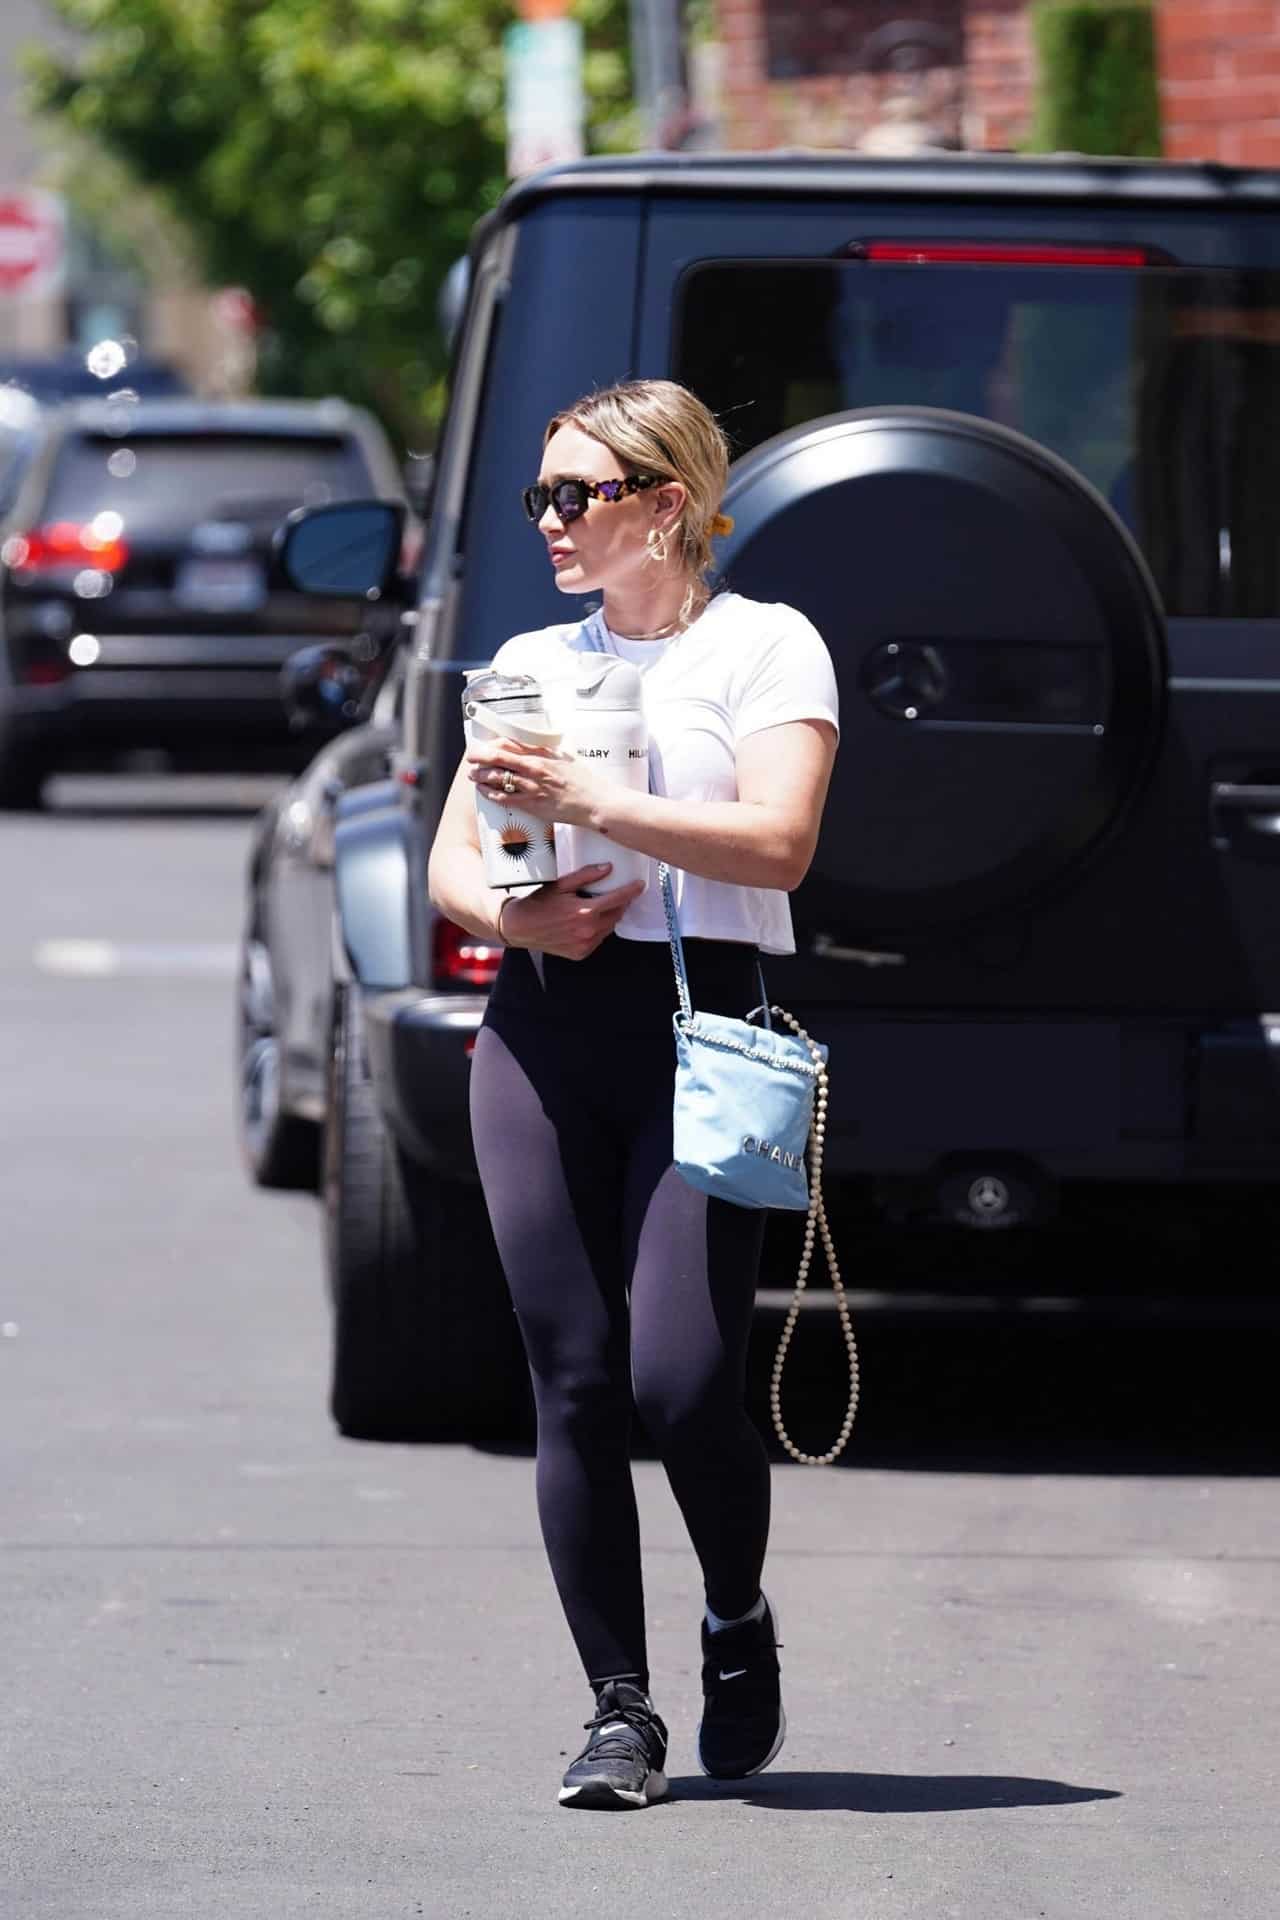 Hilary Duff Rocks Gym Style with Black Leggings and Nike Sneakers